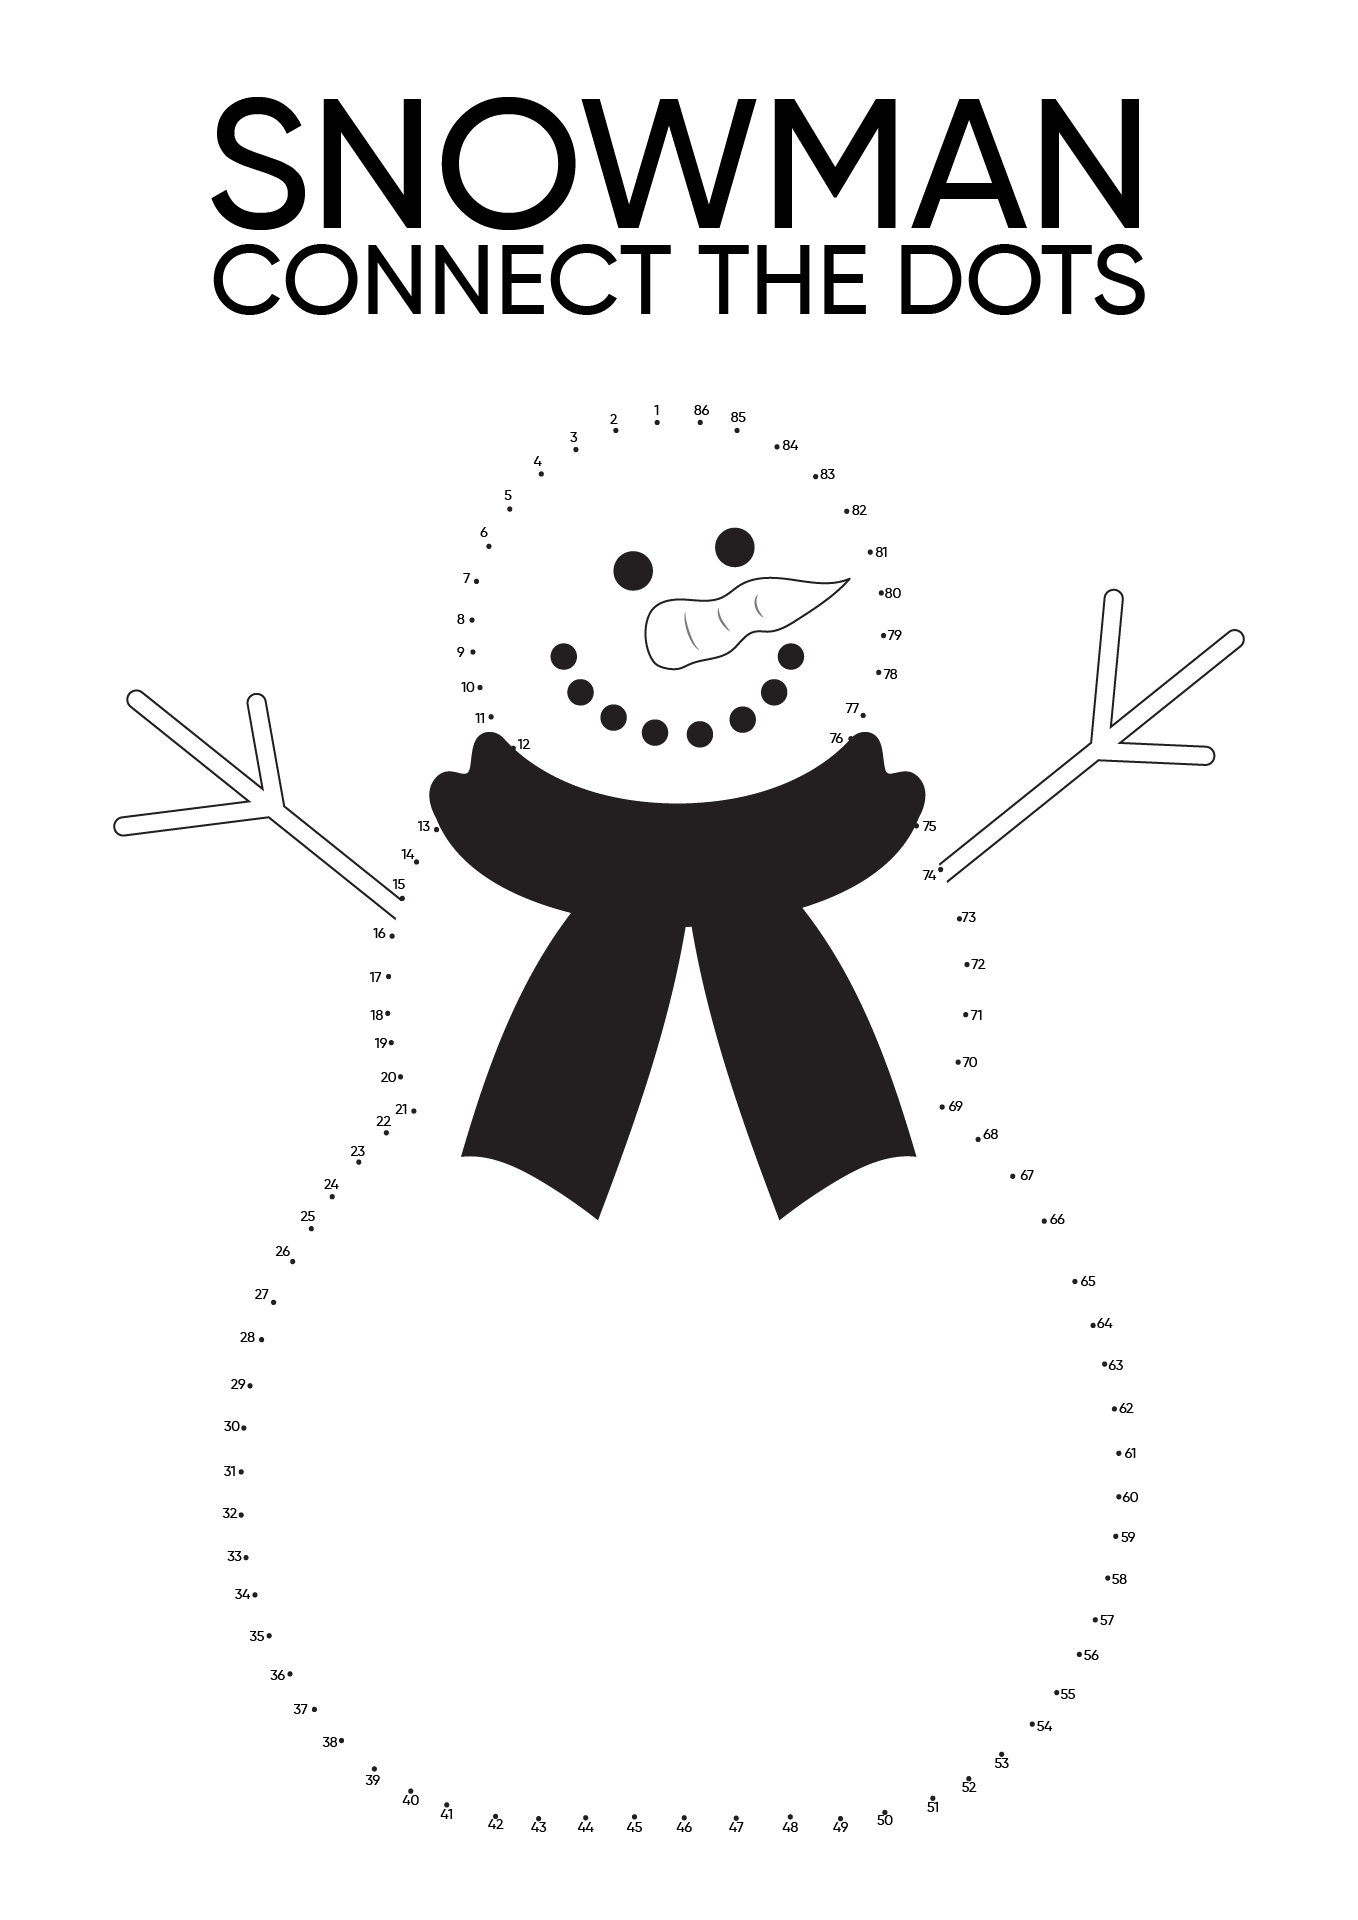 Snowman Connect the Dots Coloring Pages for Preschoolers Image